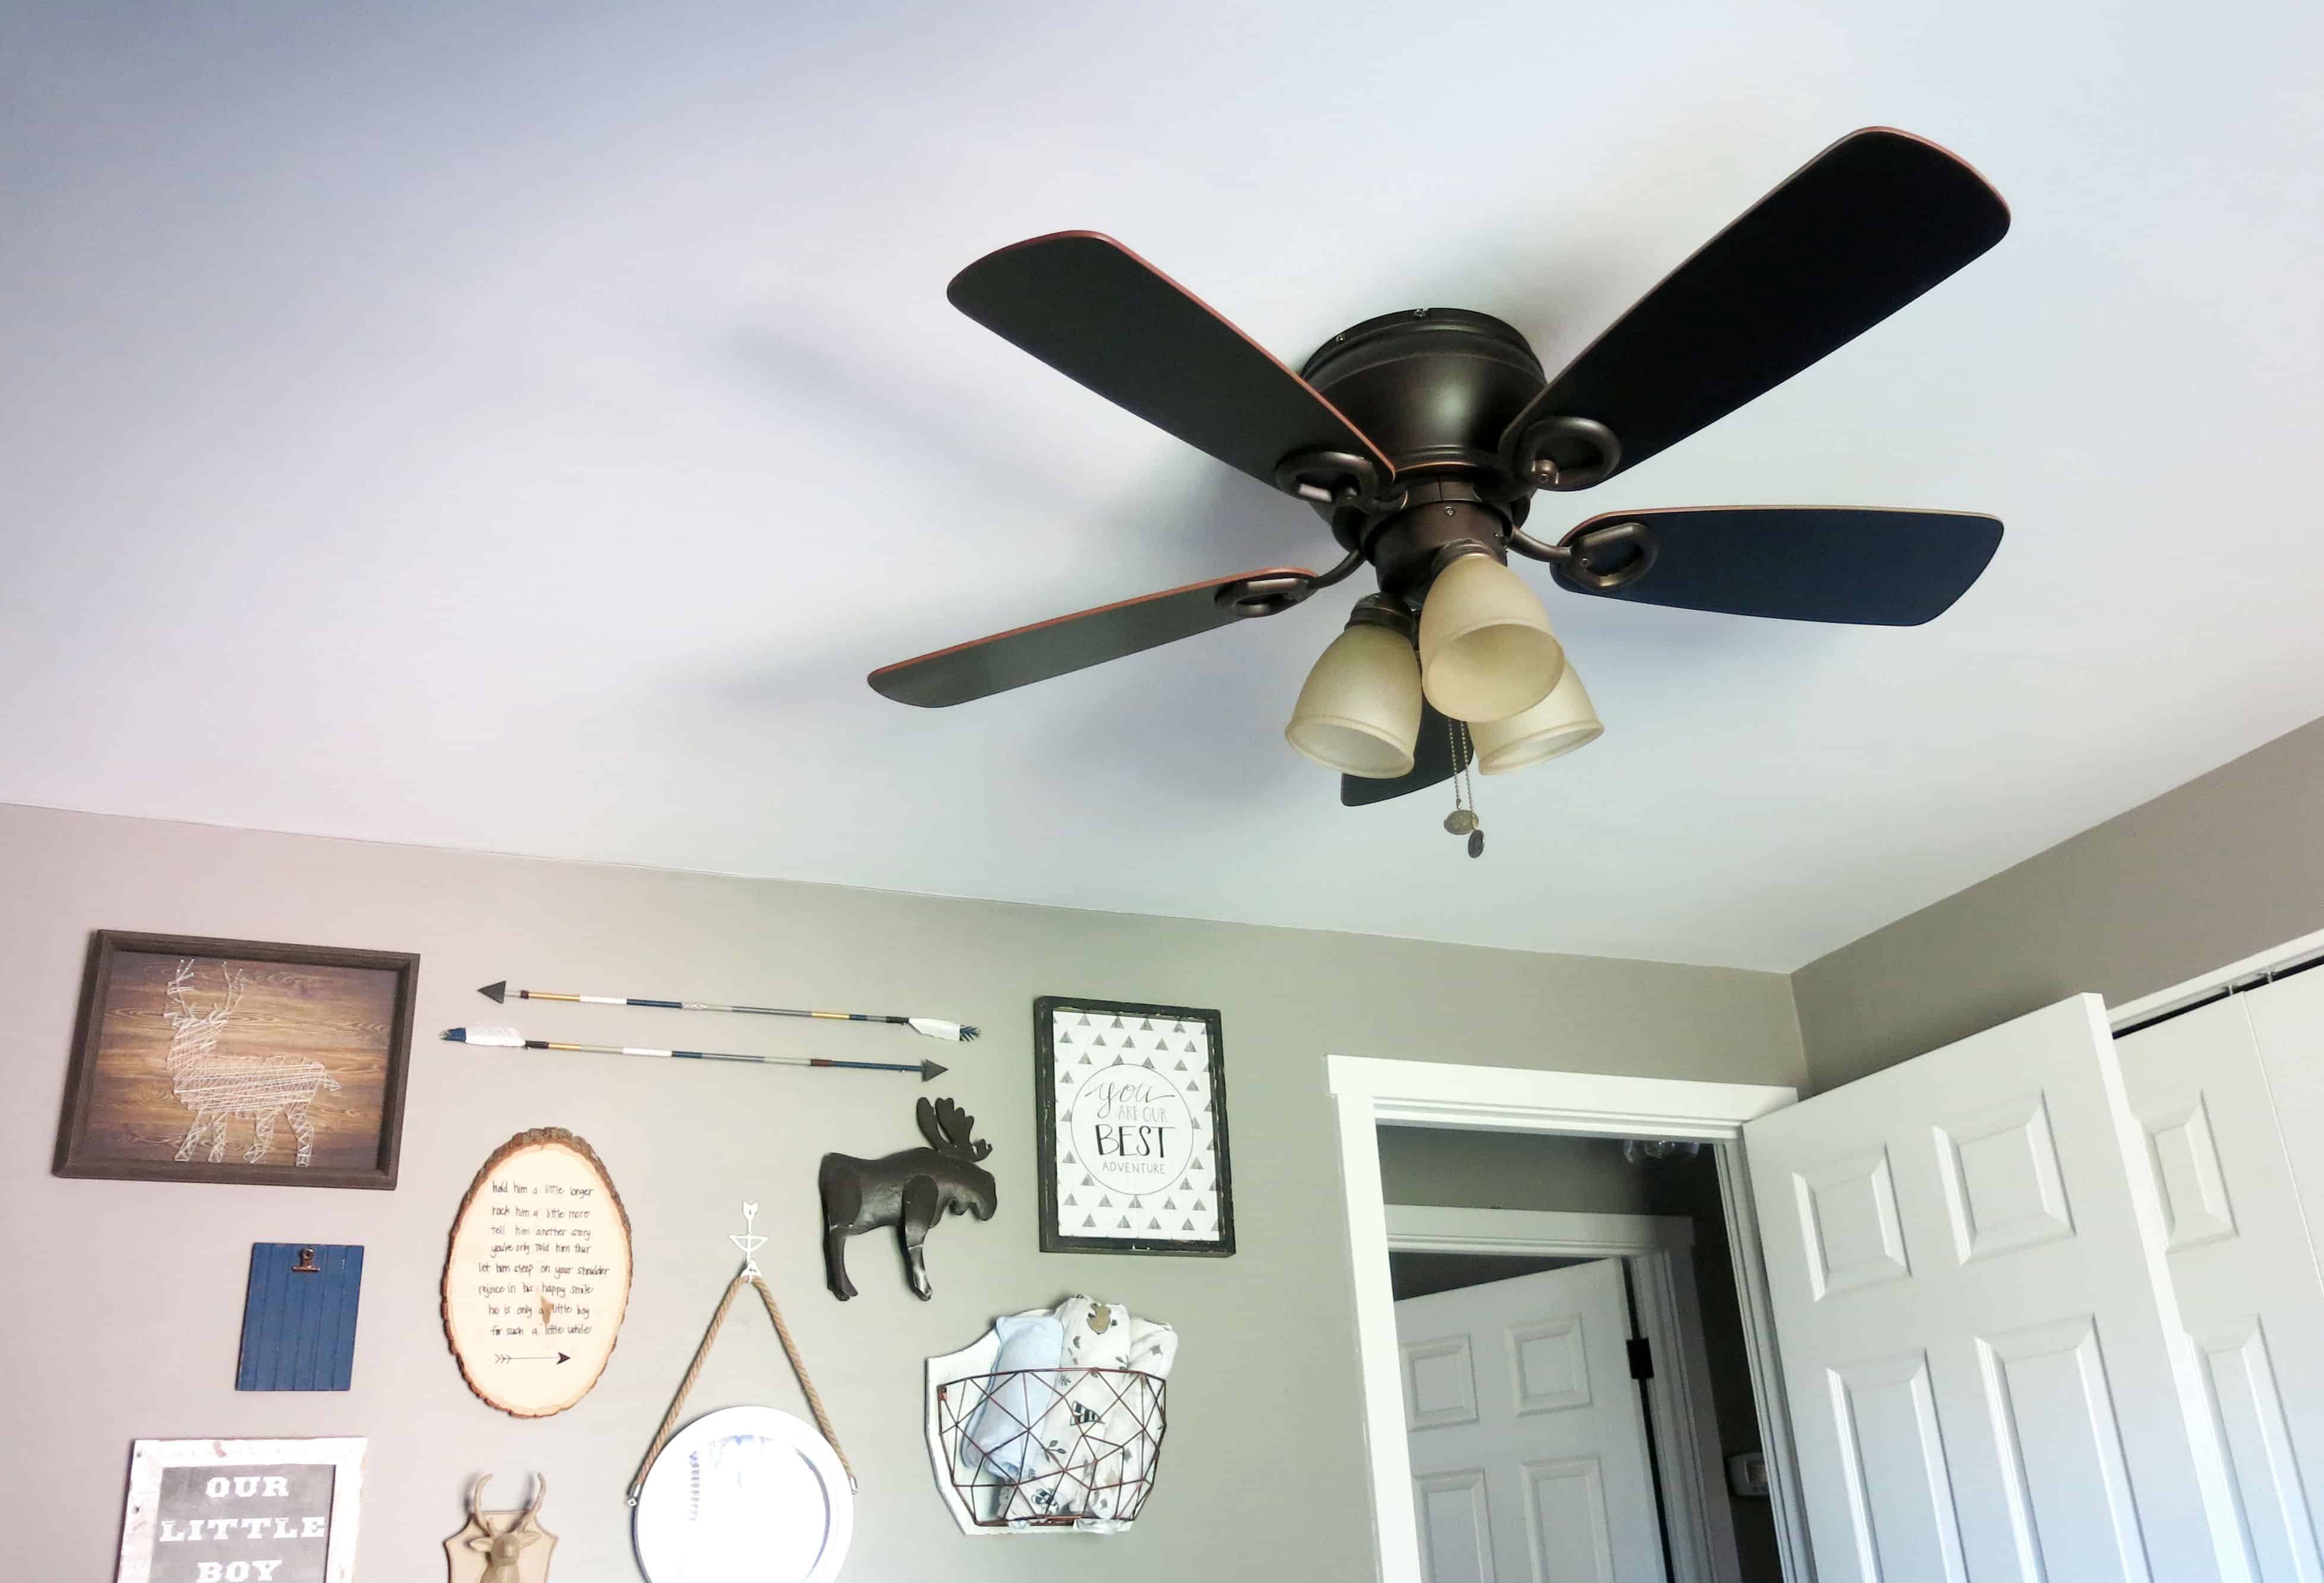 We installed new ceiling fans throughout the house, including in our son's room.